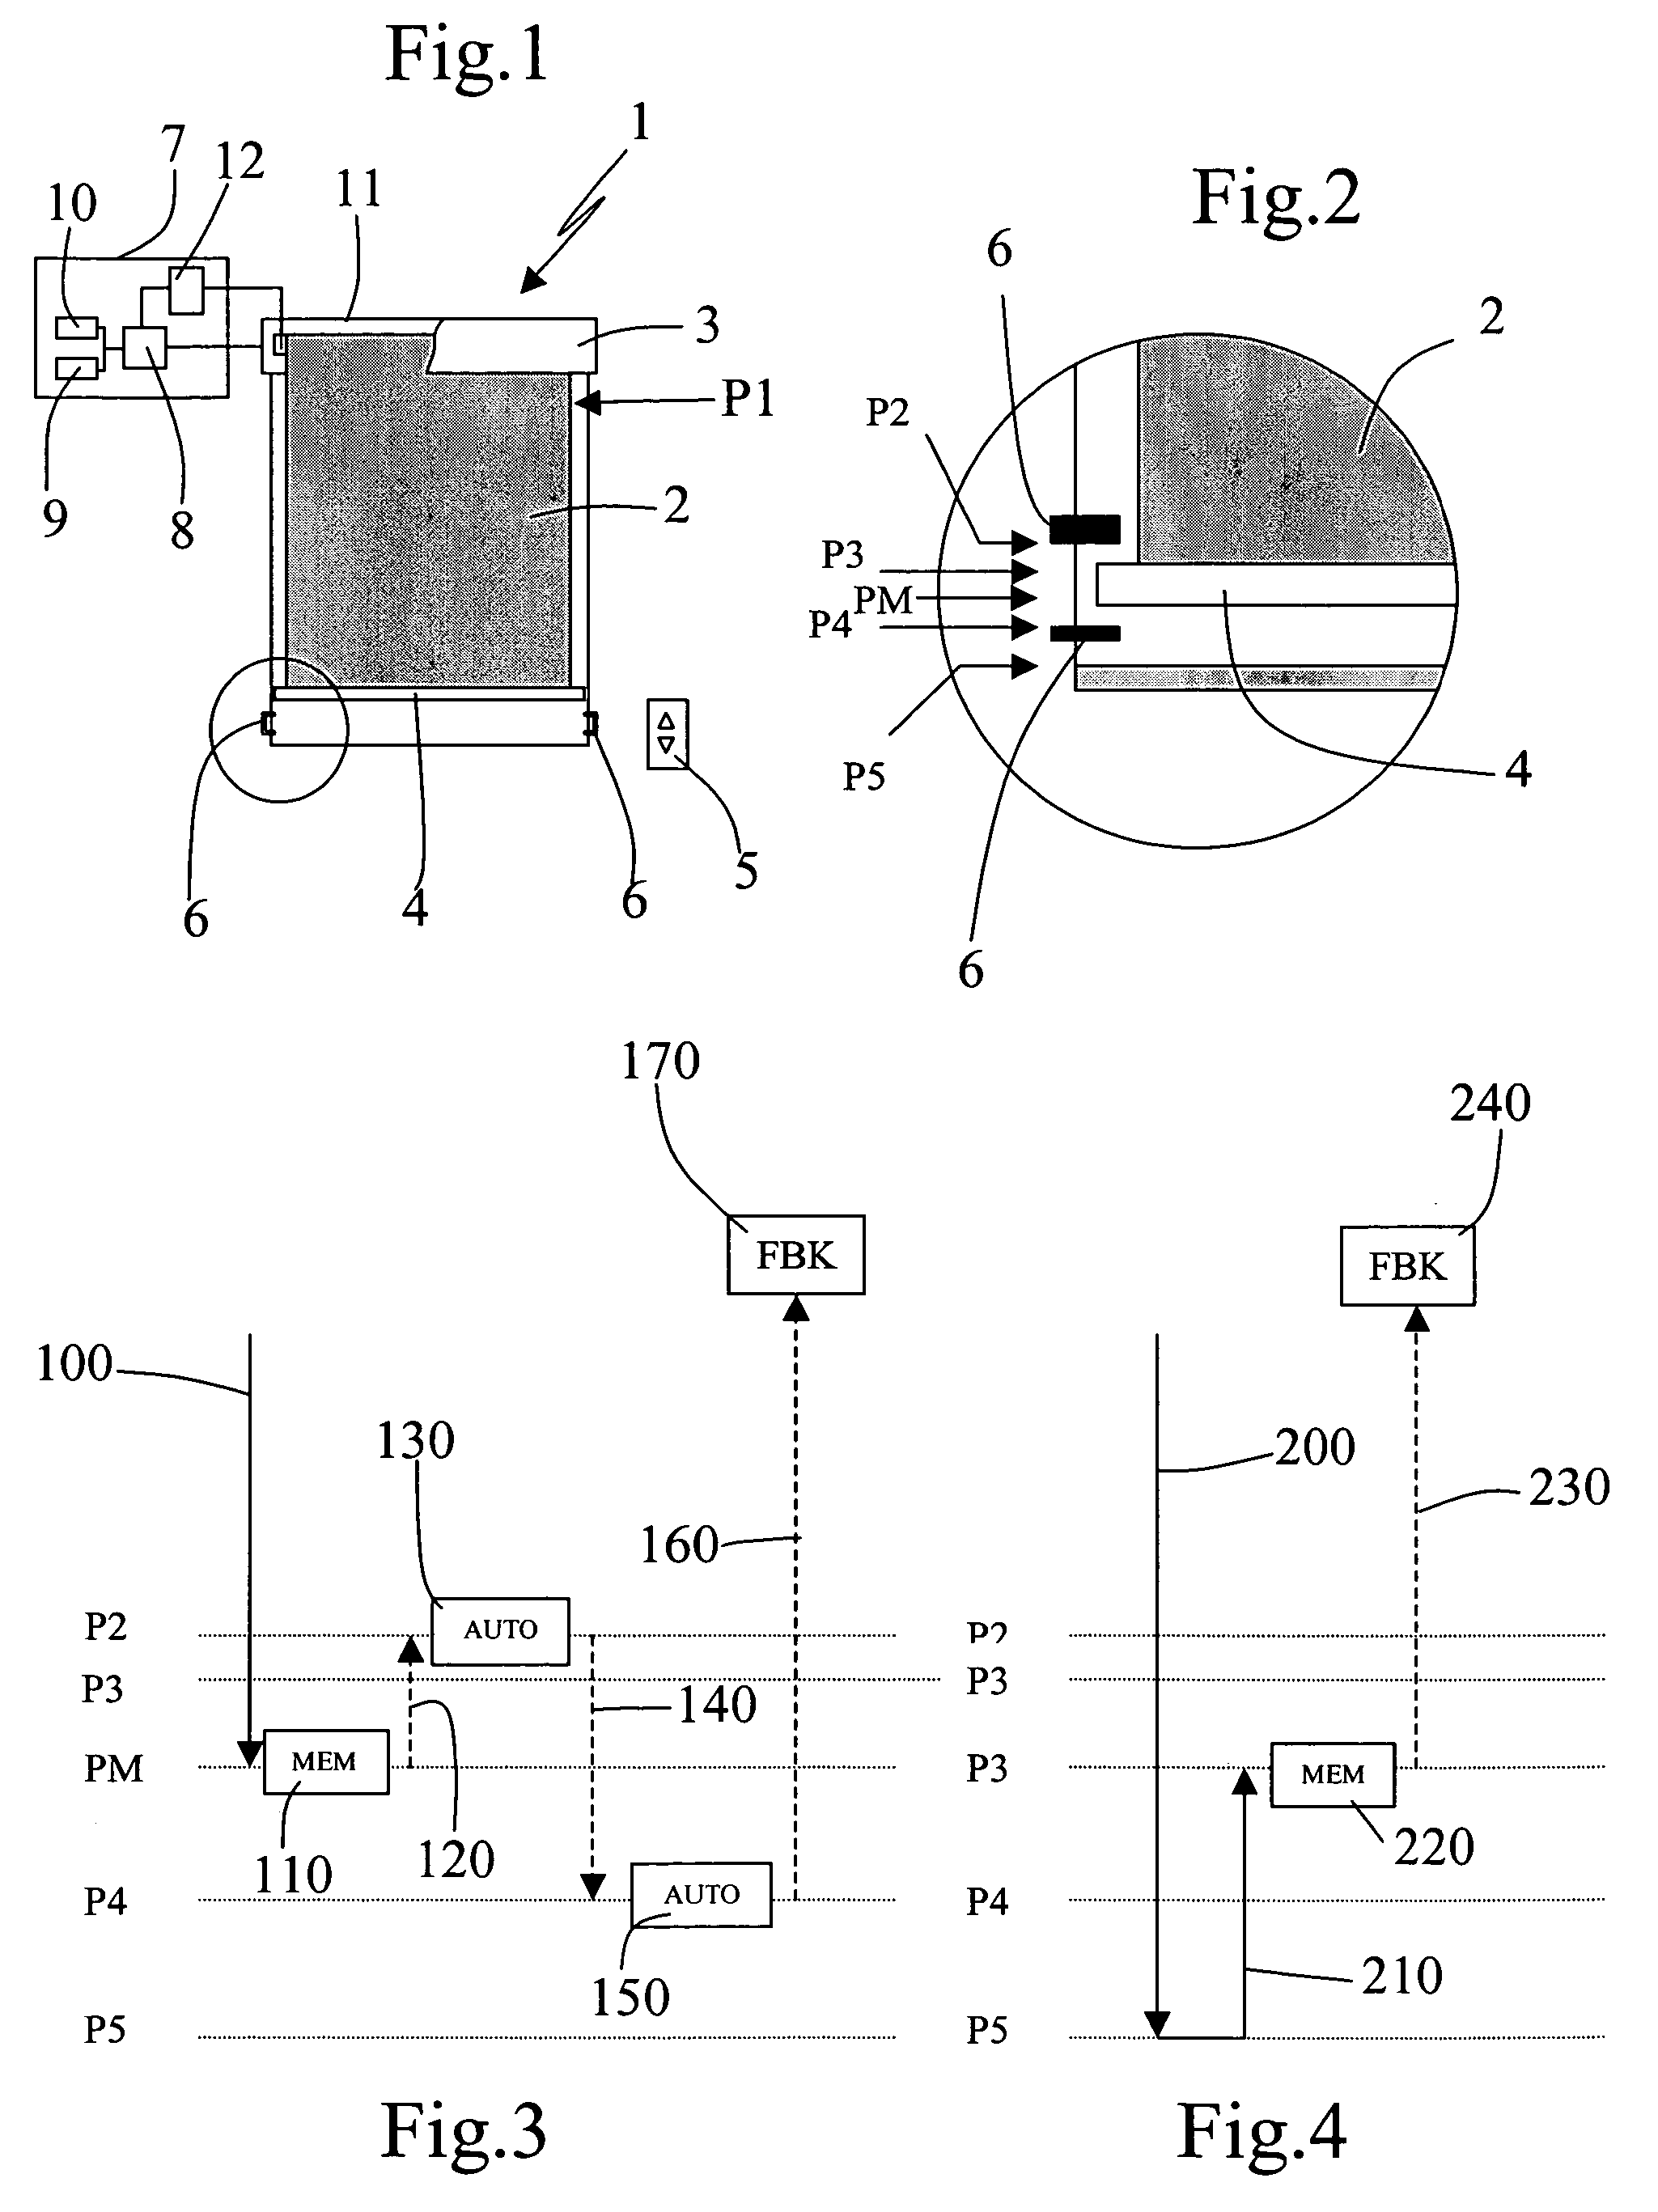 Method for operating a motorized screen